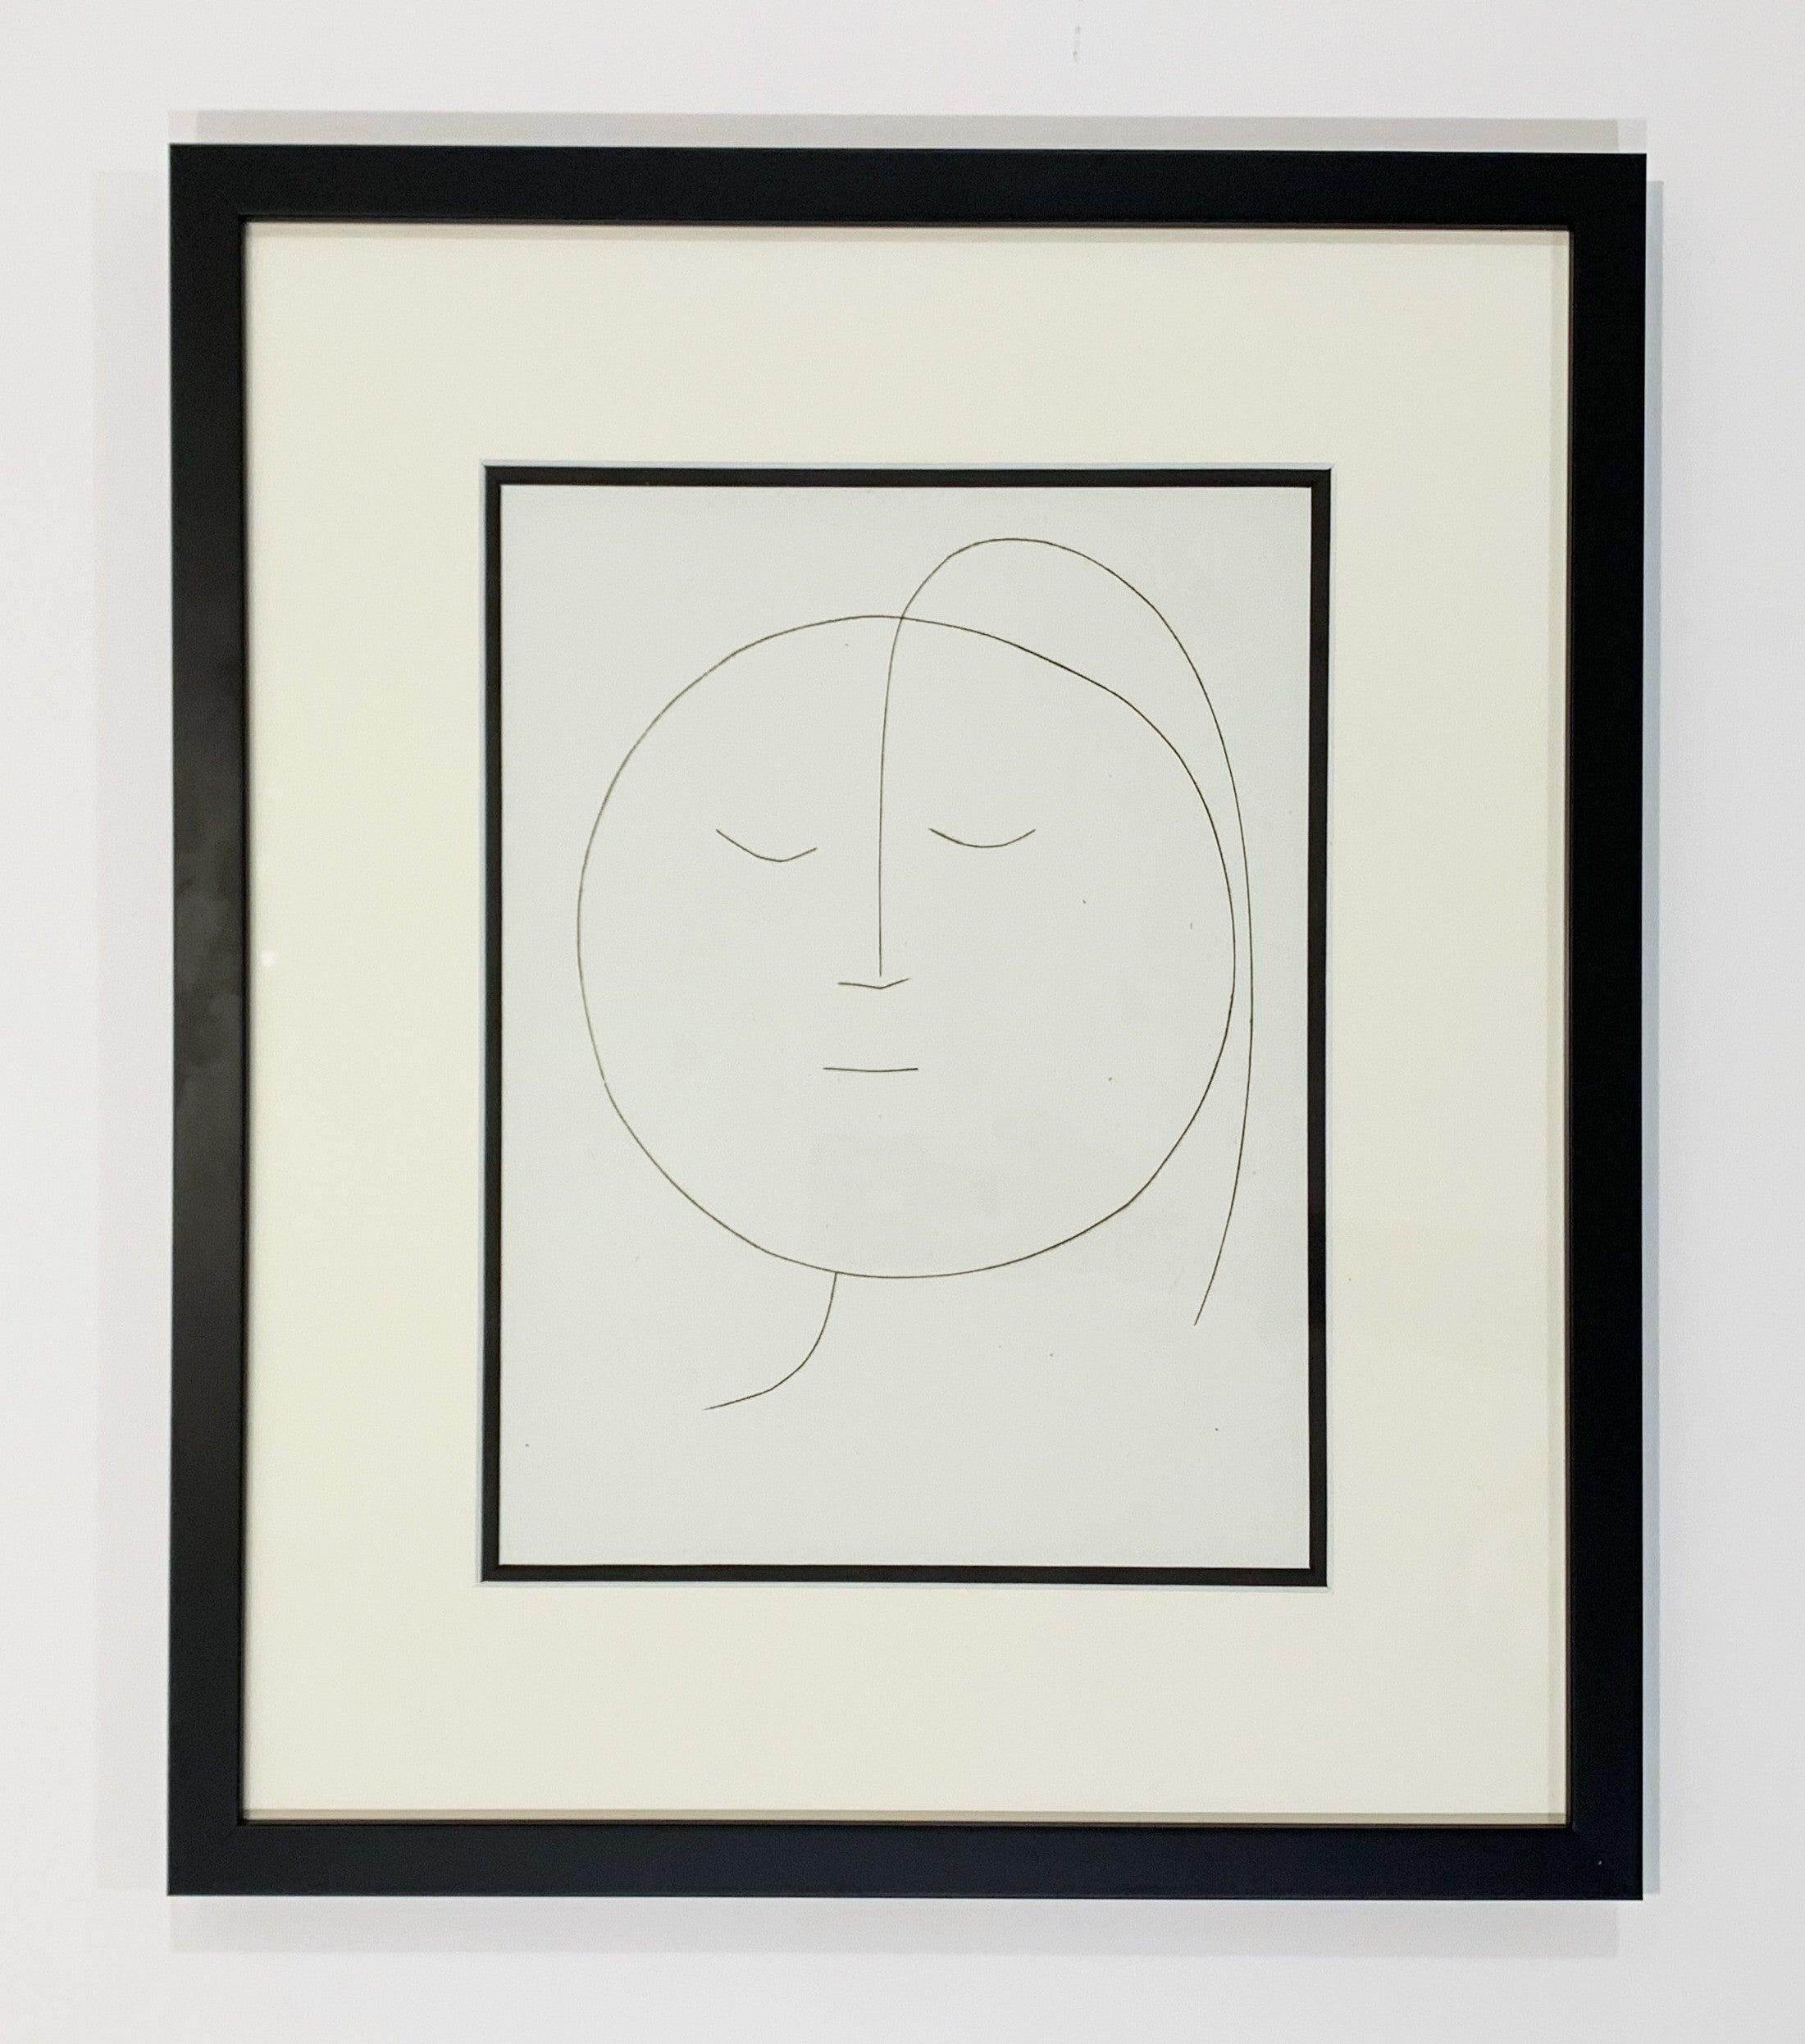 Pablo Picasso Round Head of a Woman with Hair (Plate XVIII)
Artist: Pablo Picasso
Medium: Etching on Montval wove paper
Title: Round Head of a Woman with Hair (Plate XVIII)
Portfolio: Carmen
Year: 1949
Edition: 289
Sheet Size: 13